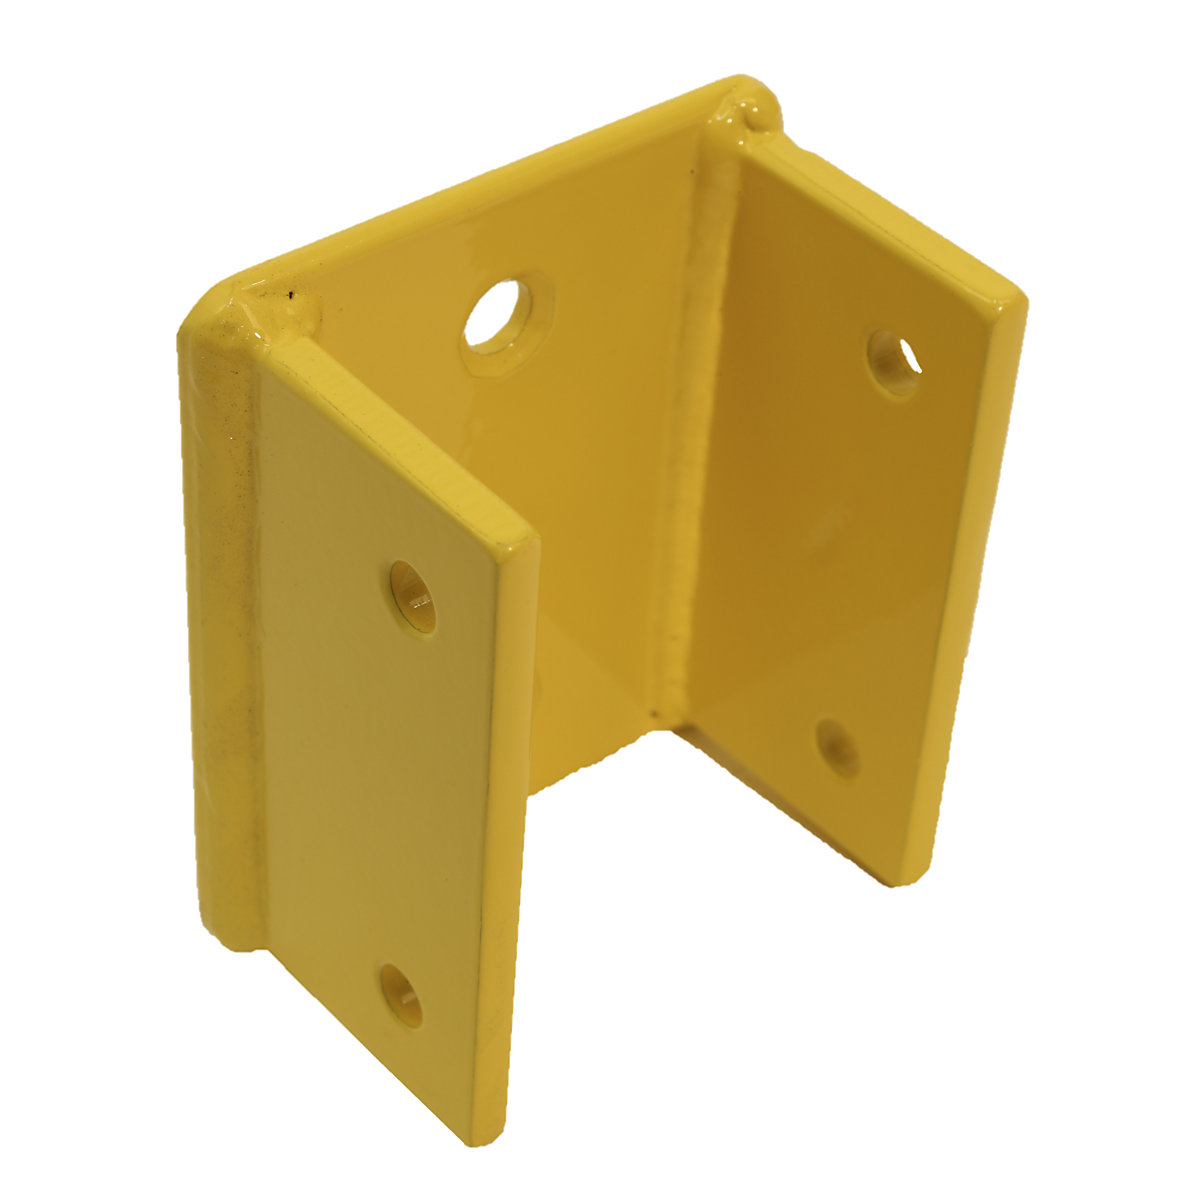 Wall bracket for safety railings